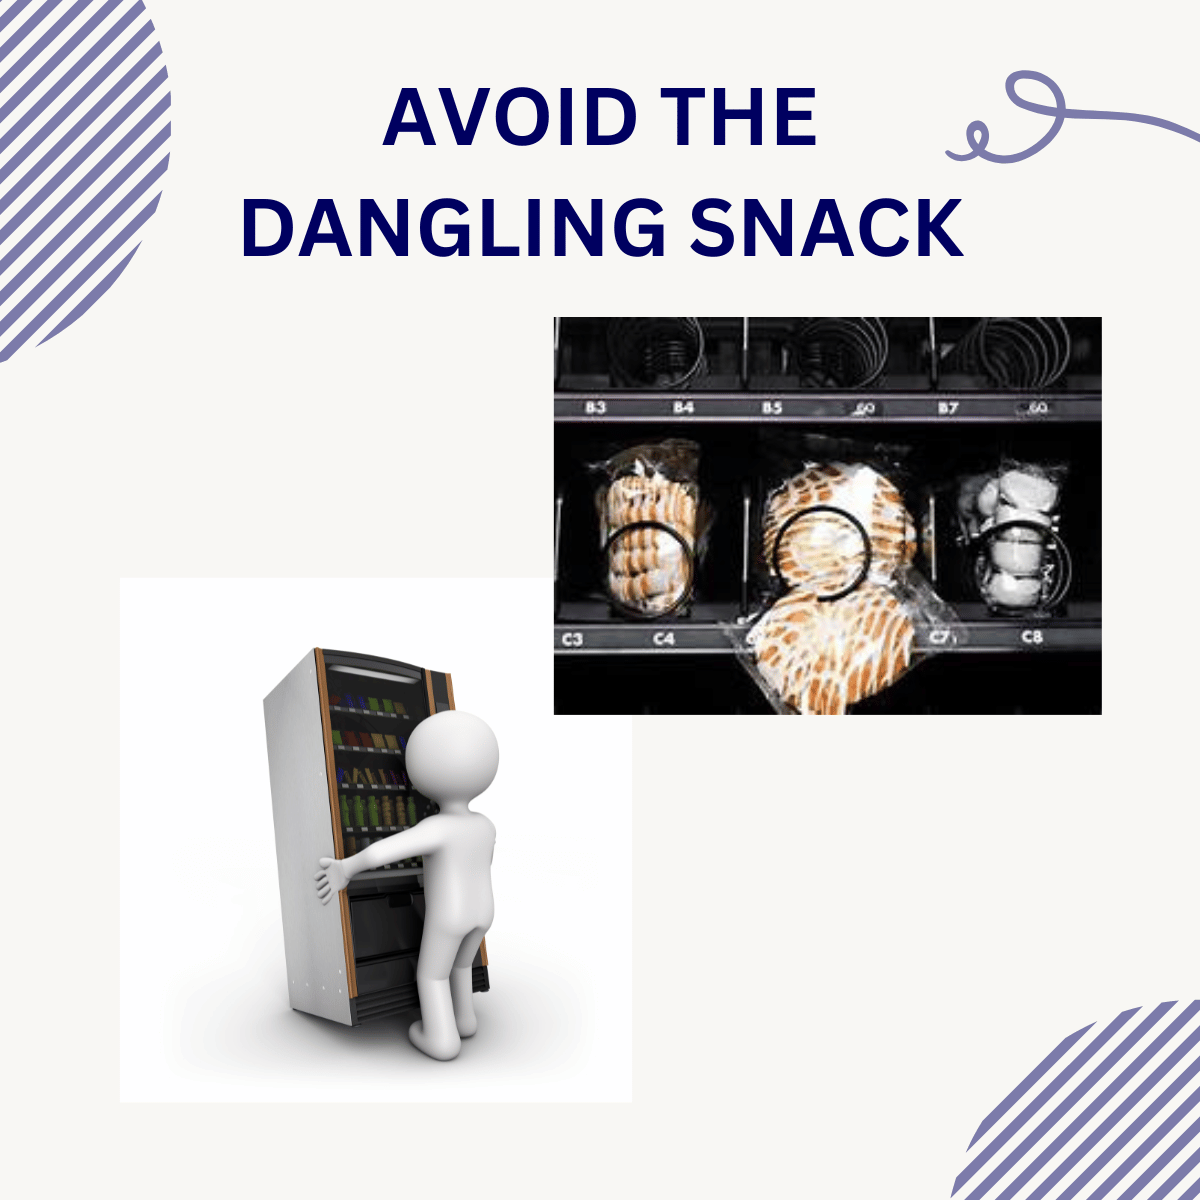 AVOID THE DANGLING SNACK